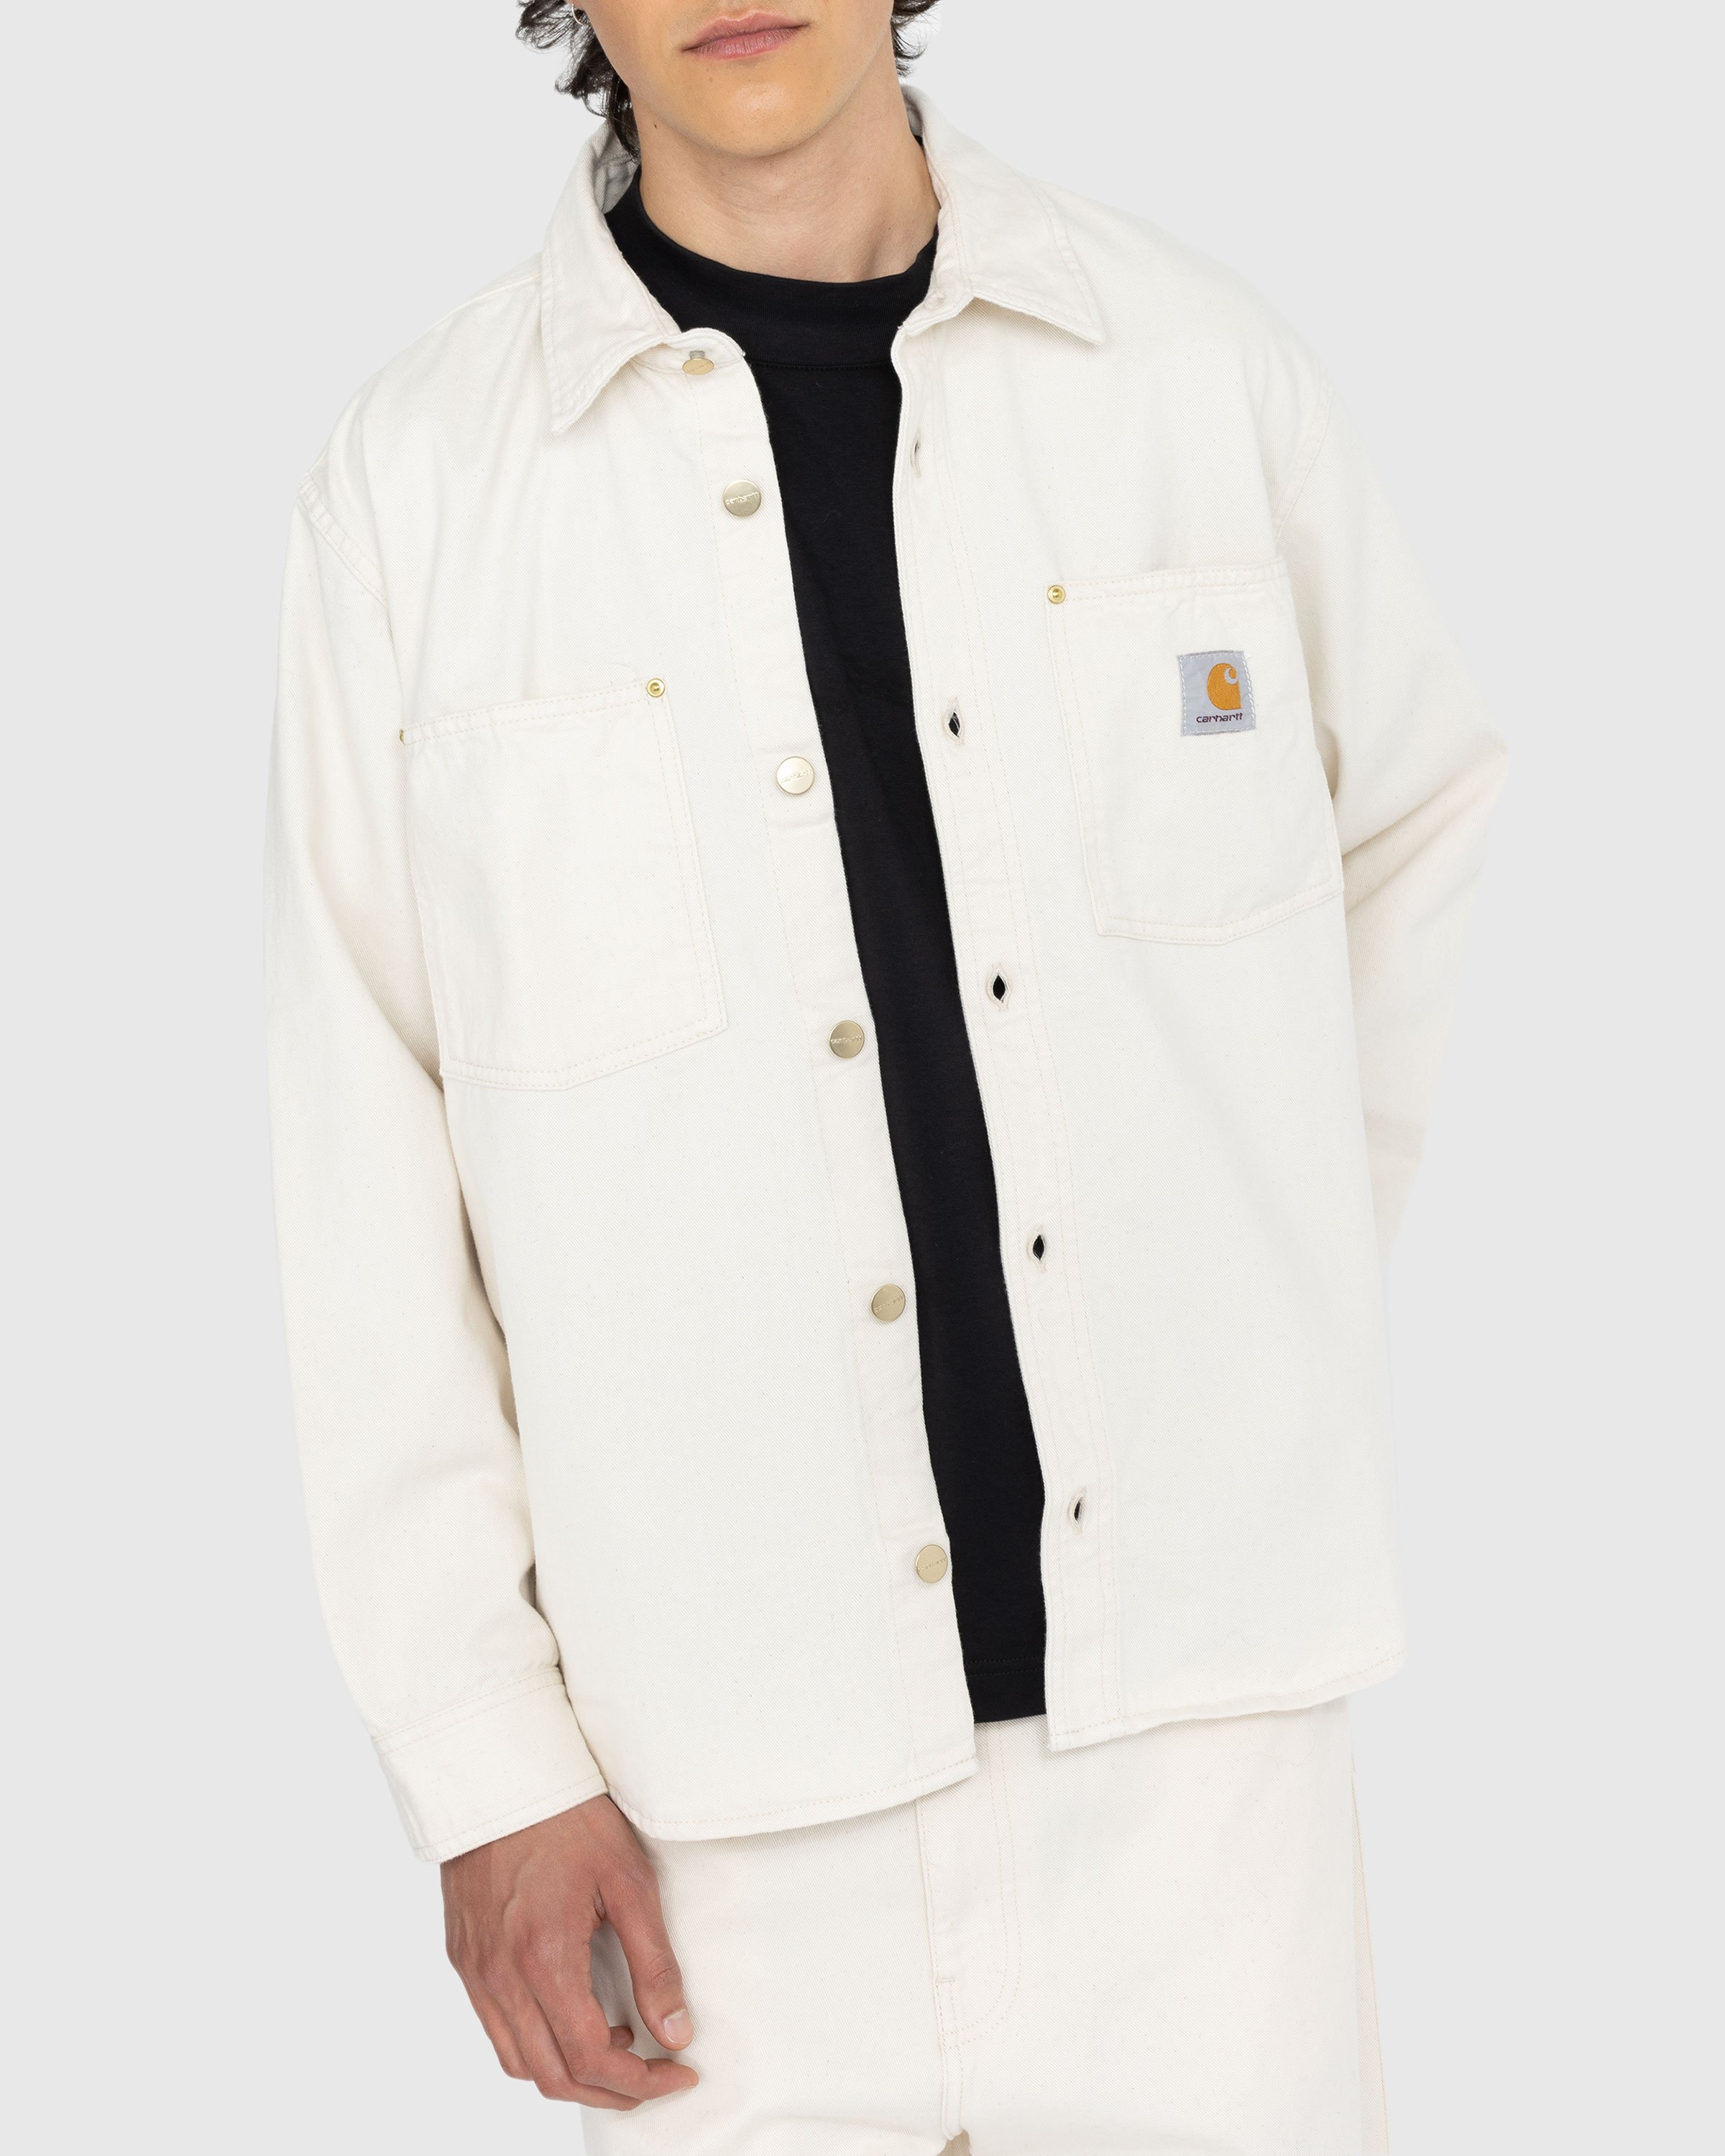 Carhartt WIP - Derby Shirt Jacket Natural - Clothing - White - Image 4